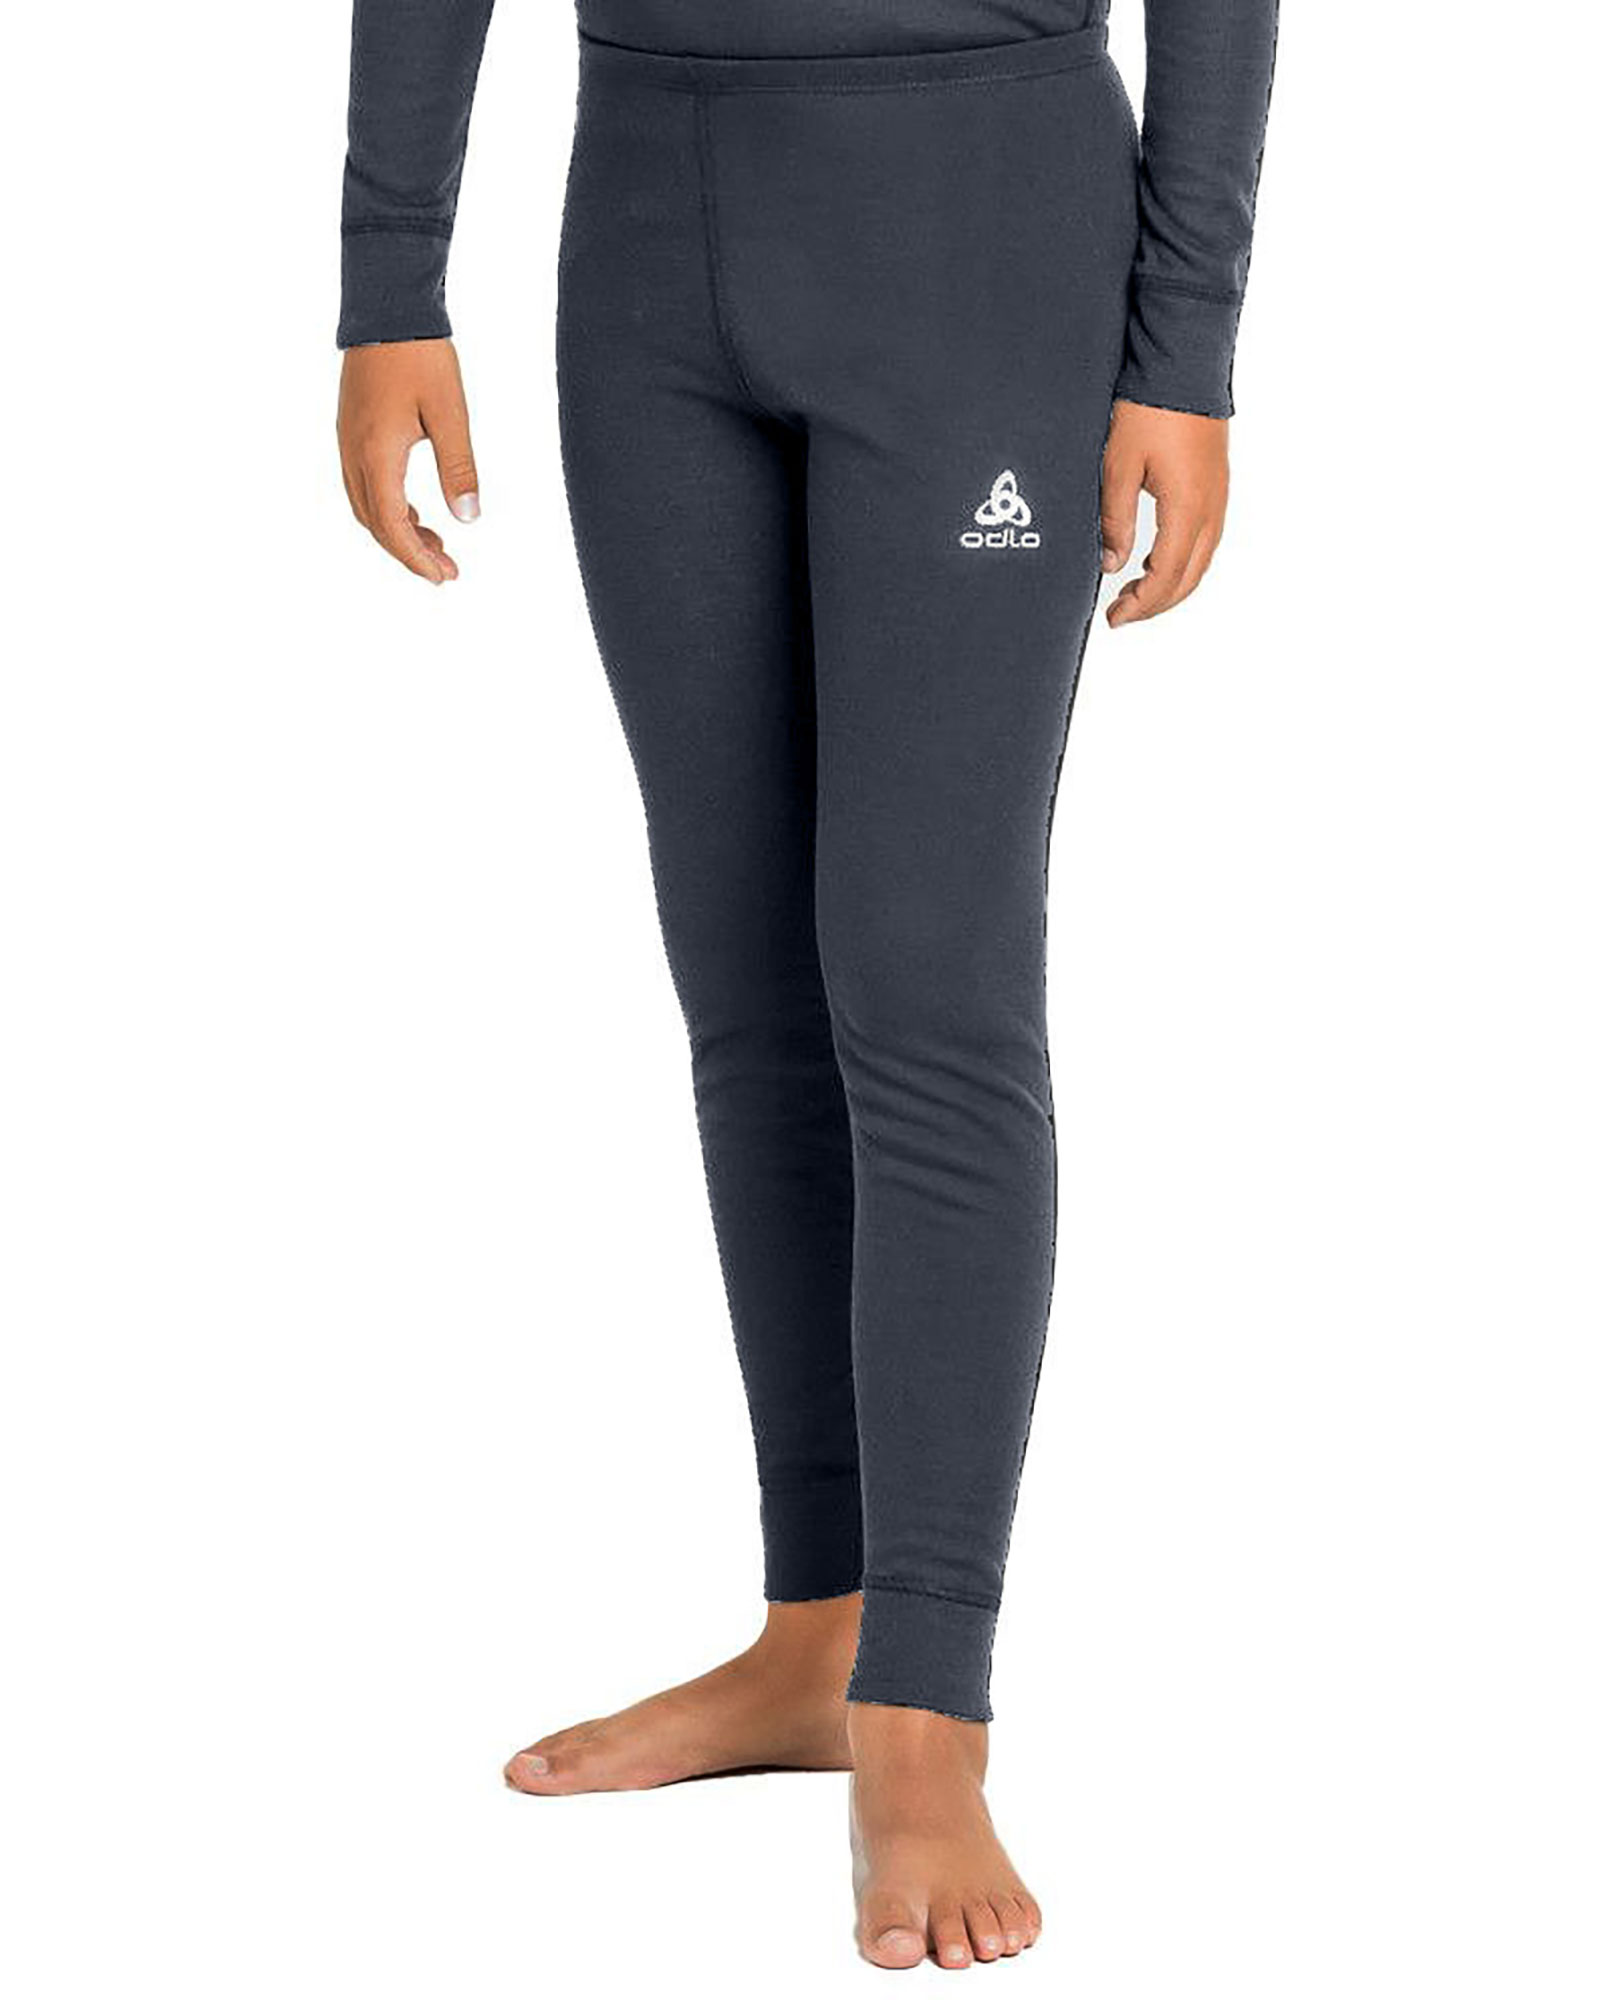 Odlo Active Warm Eco BL Kids’ Bottoms Long - India Ink 10 Years